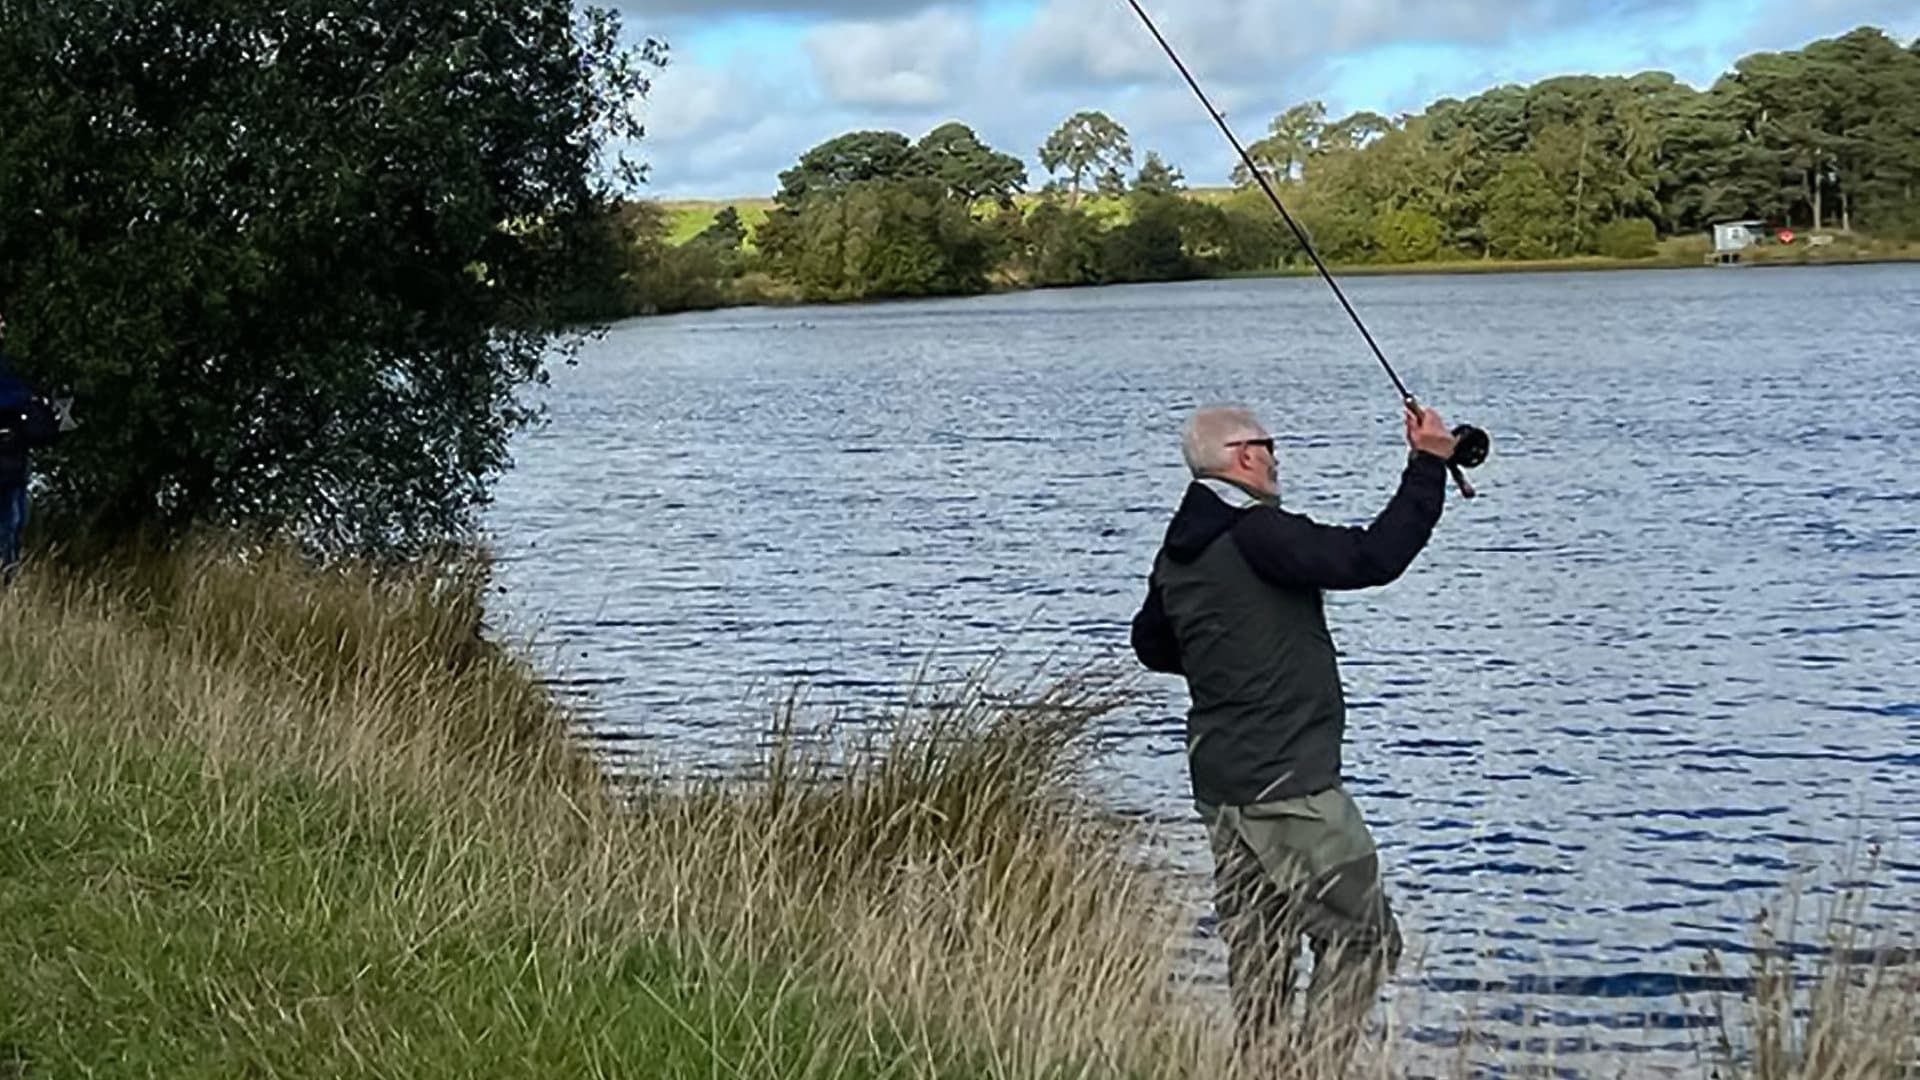 Robson Green's Weekend Escapes background